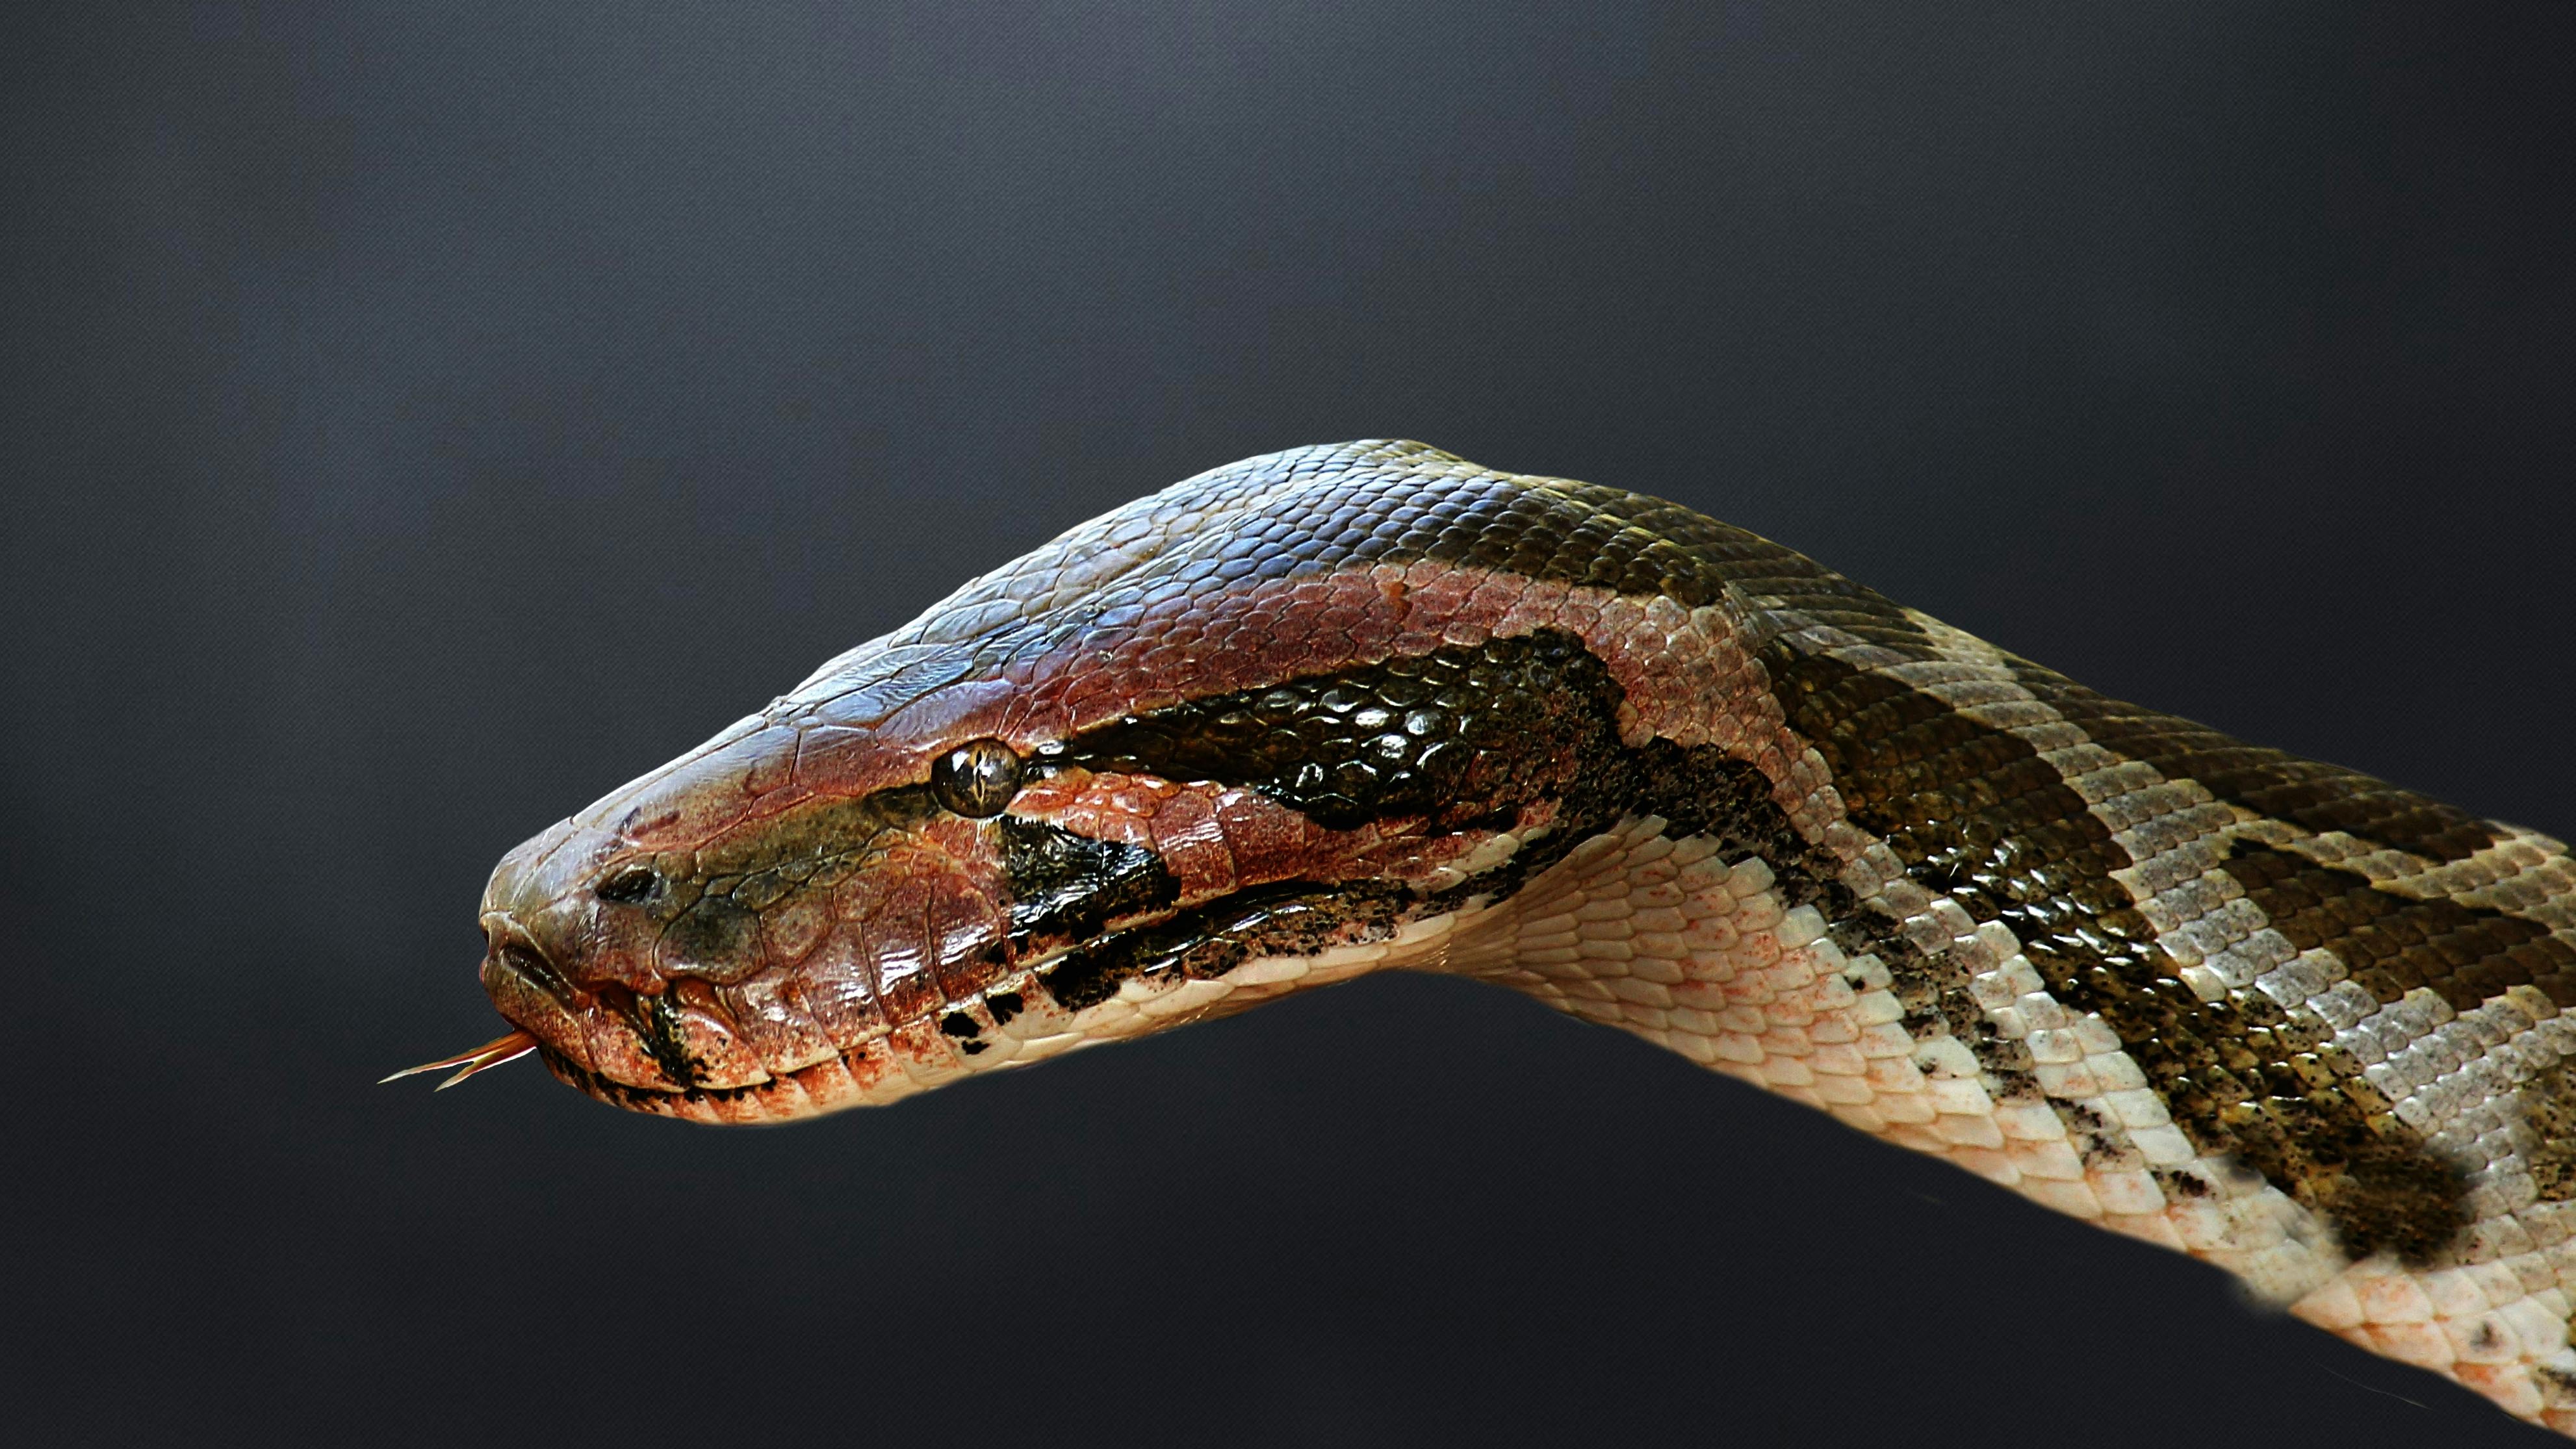 Free stock photo of The Python in the darkness